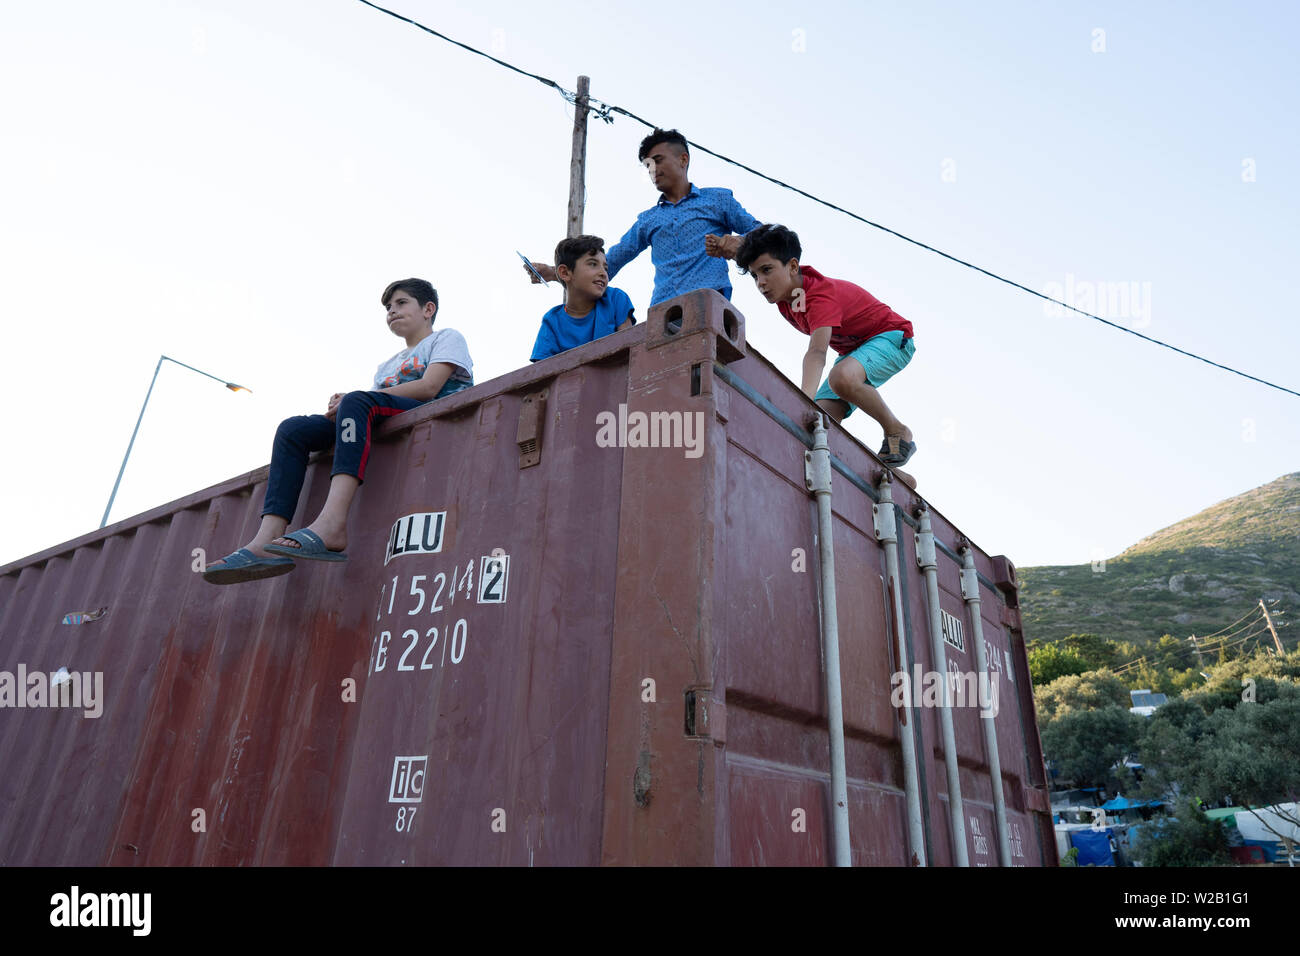 Samos, Samos, Greece. 28th June, 2019. Kids play on top of a container on Samos.Samos Island is one of Europe's migrant hotspots acting as a reception and identification centre (RIC). It was established as a temporary accommodation site where migrants could be processed before moving to a refugee camp on the mainland. However, due to the continued number of arrivals, the mainland camps are full and so migrants are being left at the islands. The conditions are inhuman as the Central Government has for several years ignored requests from the municipality for assistance for the island. (Credi Stock Photo